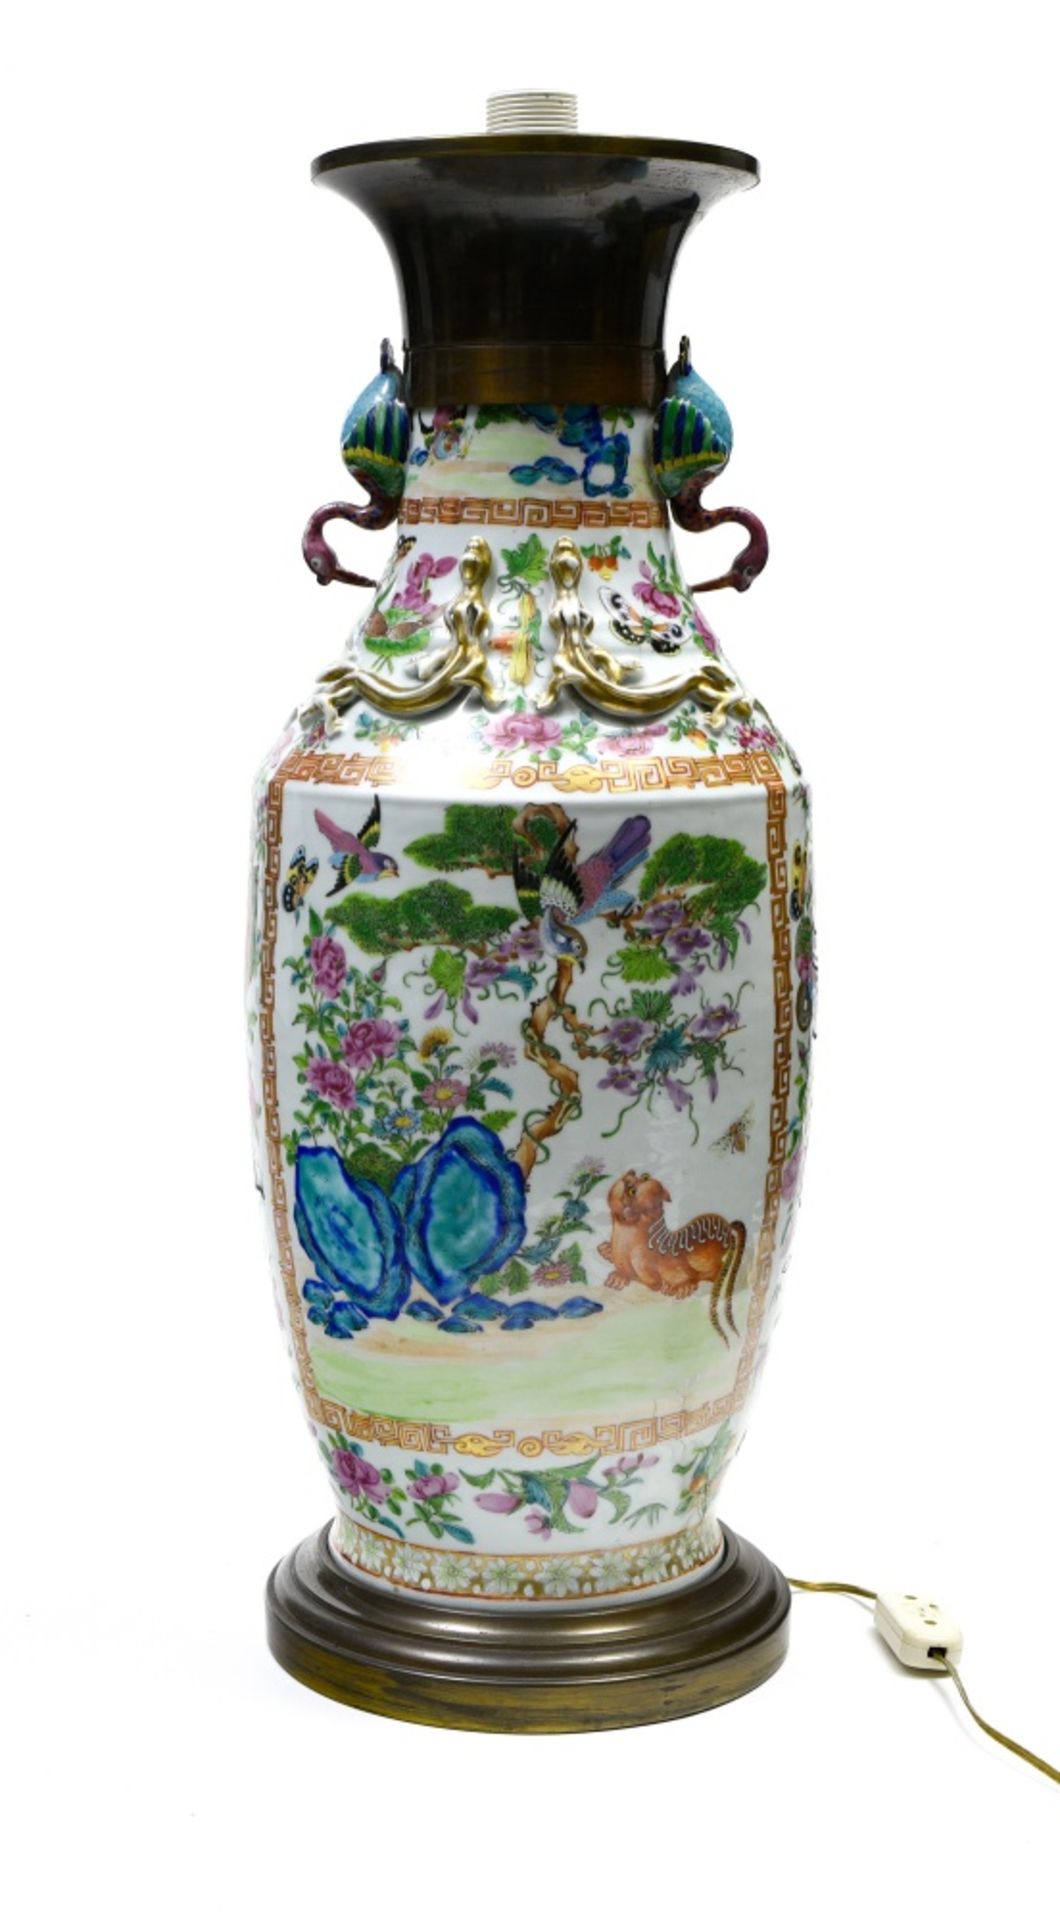 China, 19th century Large Famille Rose vase converted to lamp, Famille Rose porcelain, decorated